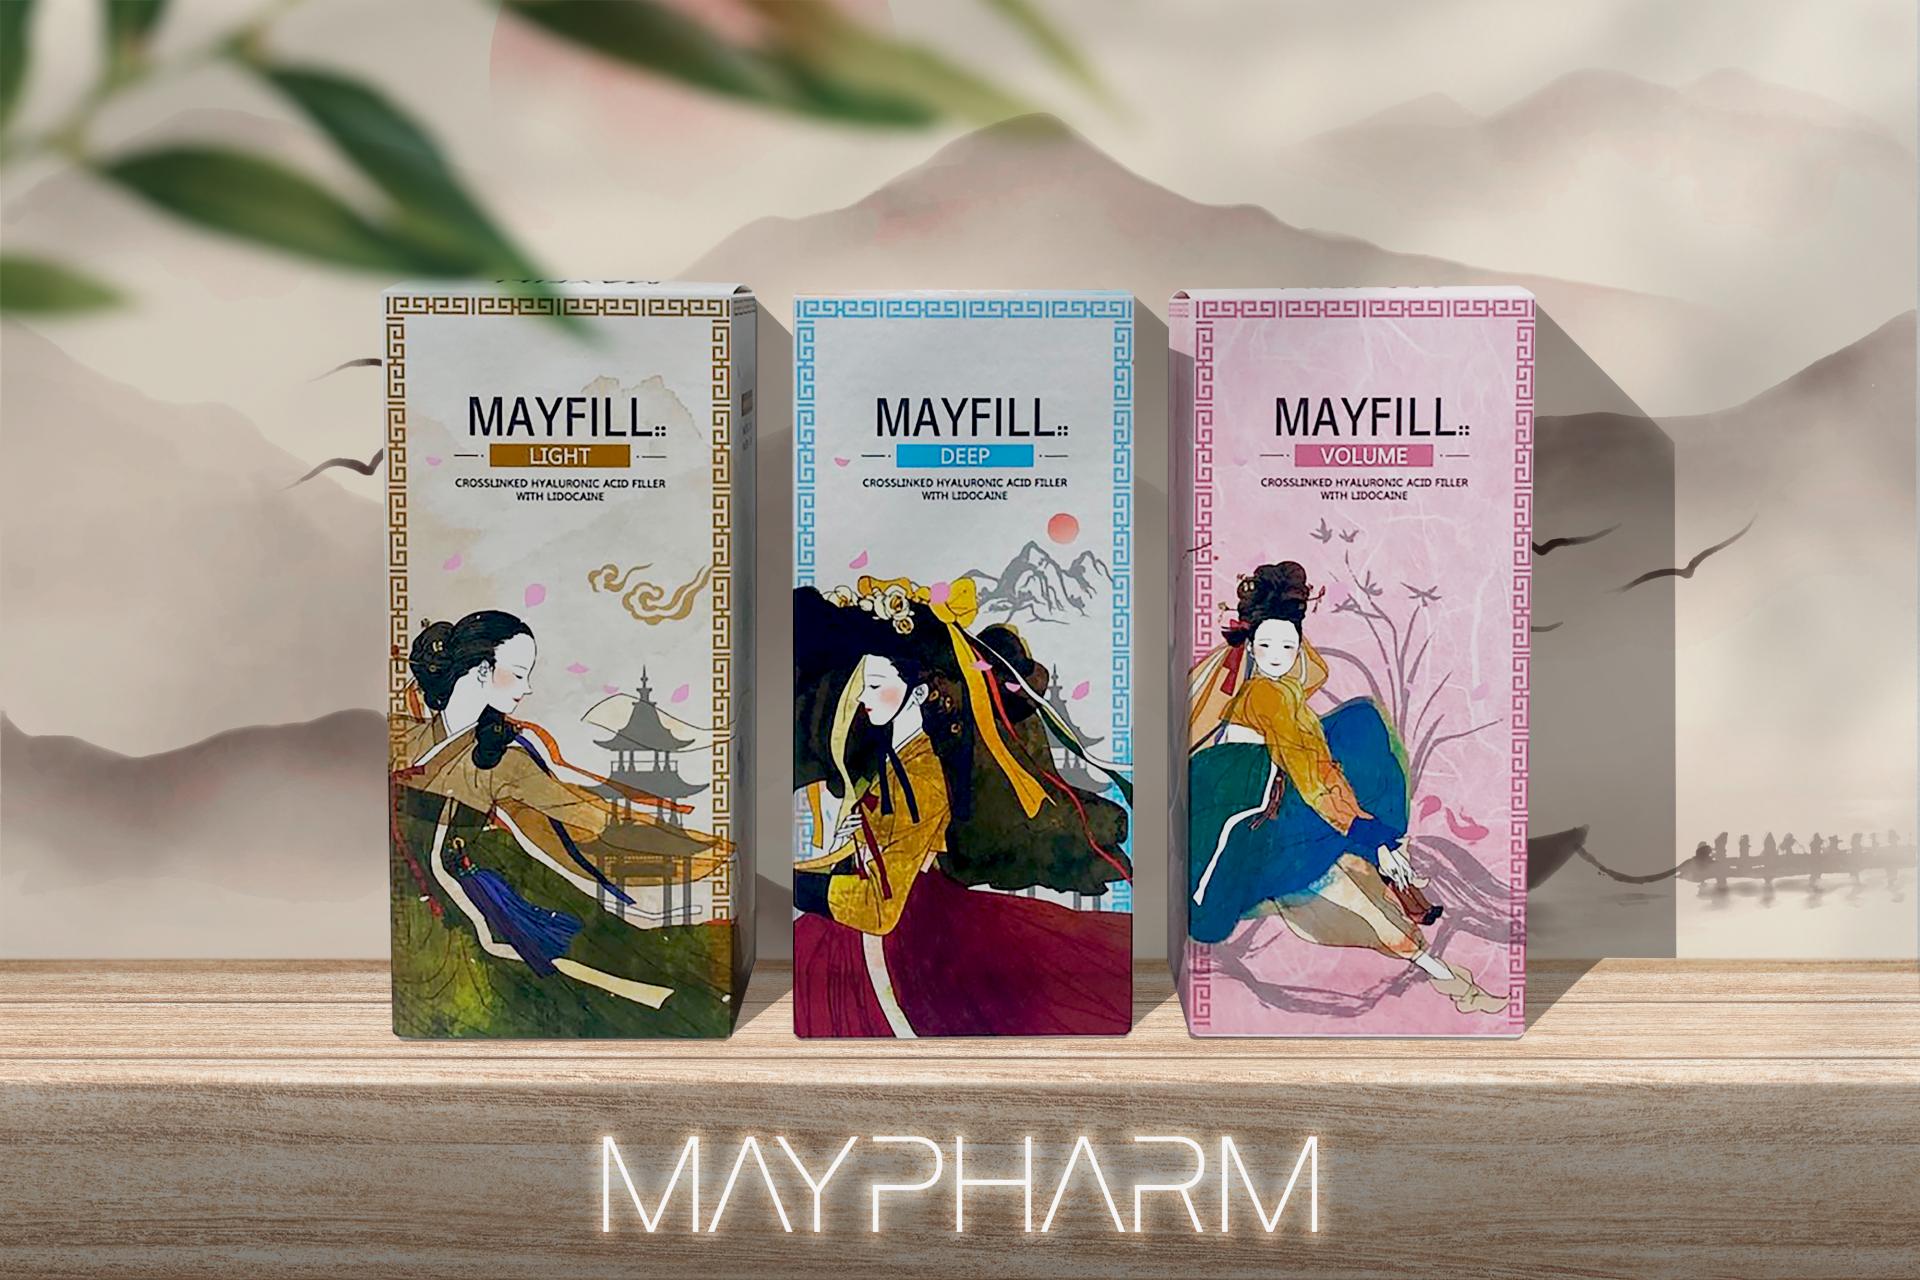 Maypharm's new filler MayFill contains Multi-layered Phasic Hyaluronic Acid based with new R2 Technology (Rotation and Revolution), and lidocaine for comfortable application, unlike Metoo Fill (CE).